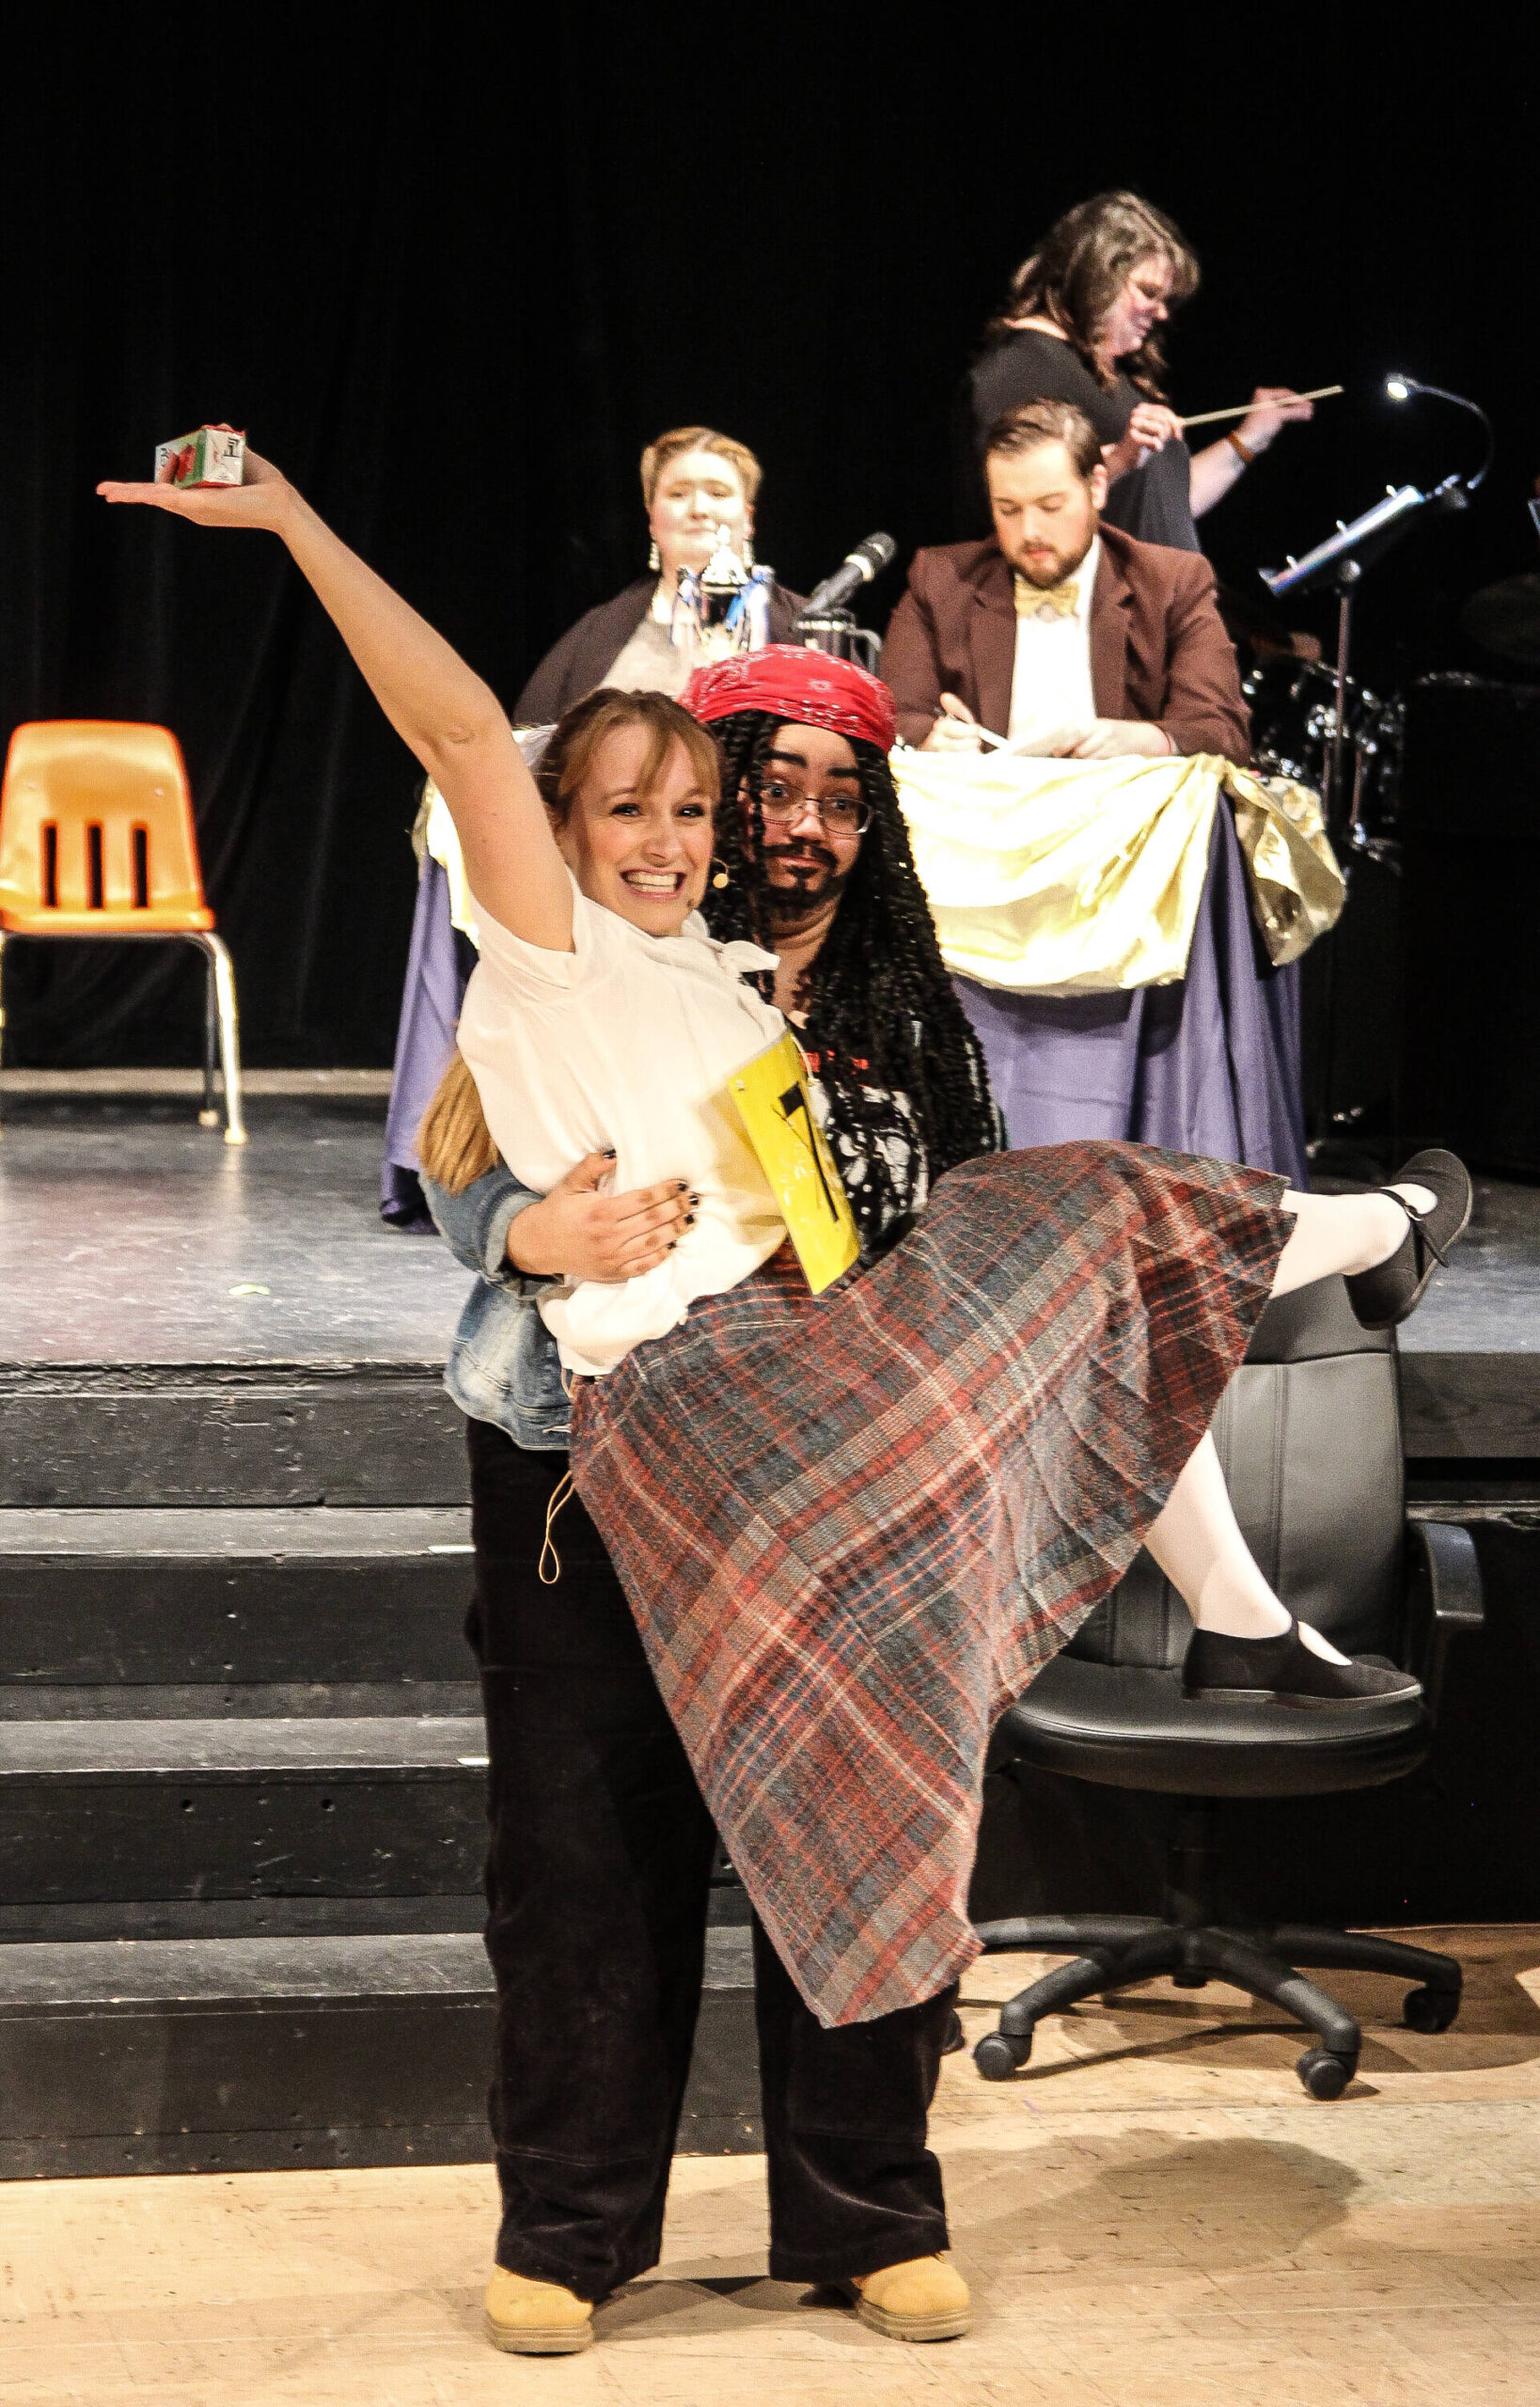 Mitch Mahoney (Grace Jones) holds Marcy Park (Karina Andrew) in a scene of the show. (Photo by Luisa Loi)